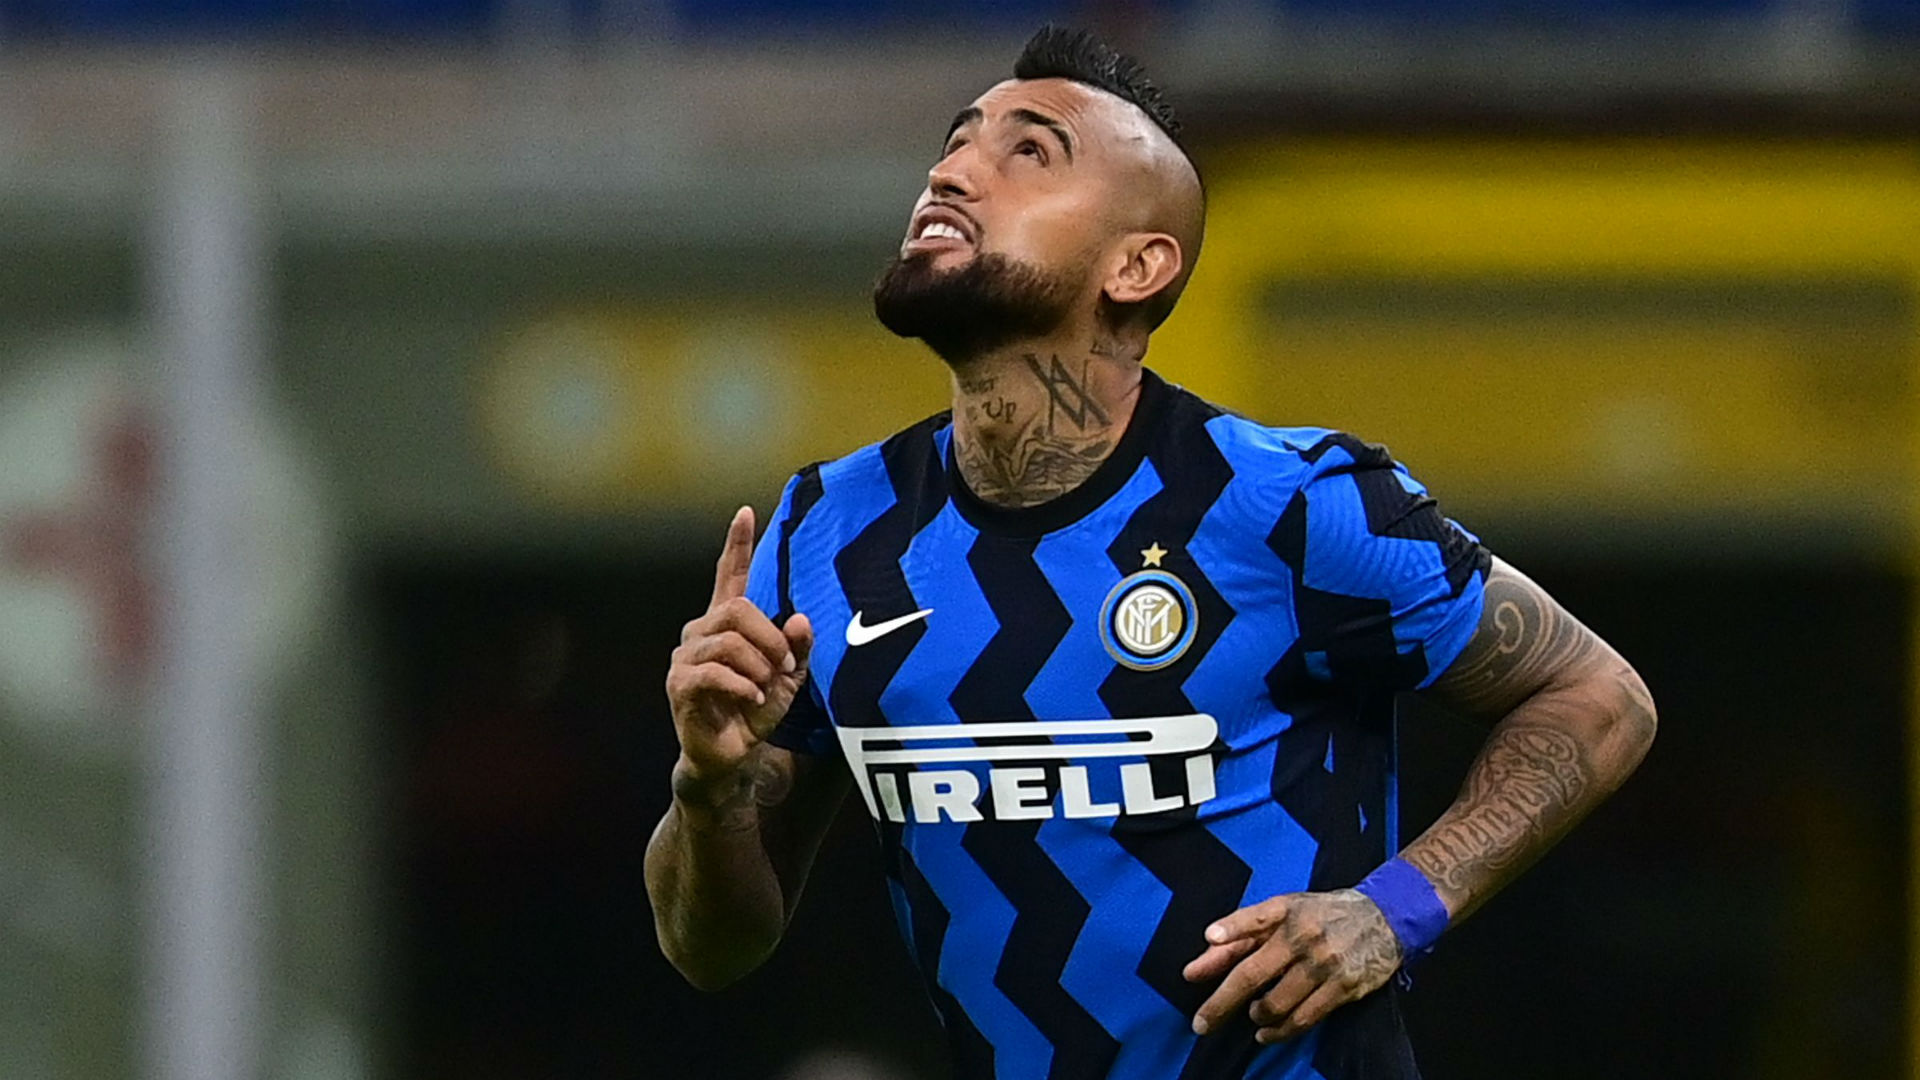 Vidal: I want Inter to beat Real Madrid so Barcelona fans can celebrate -